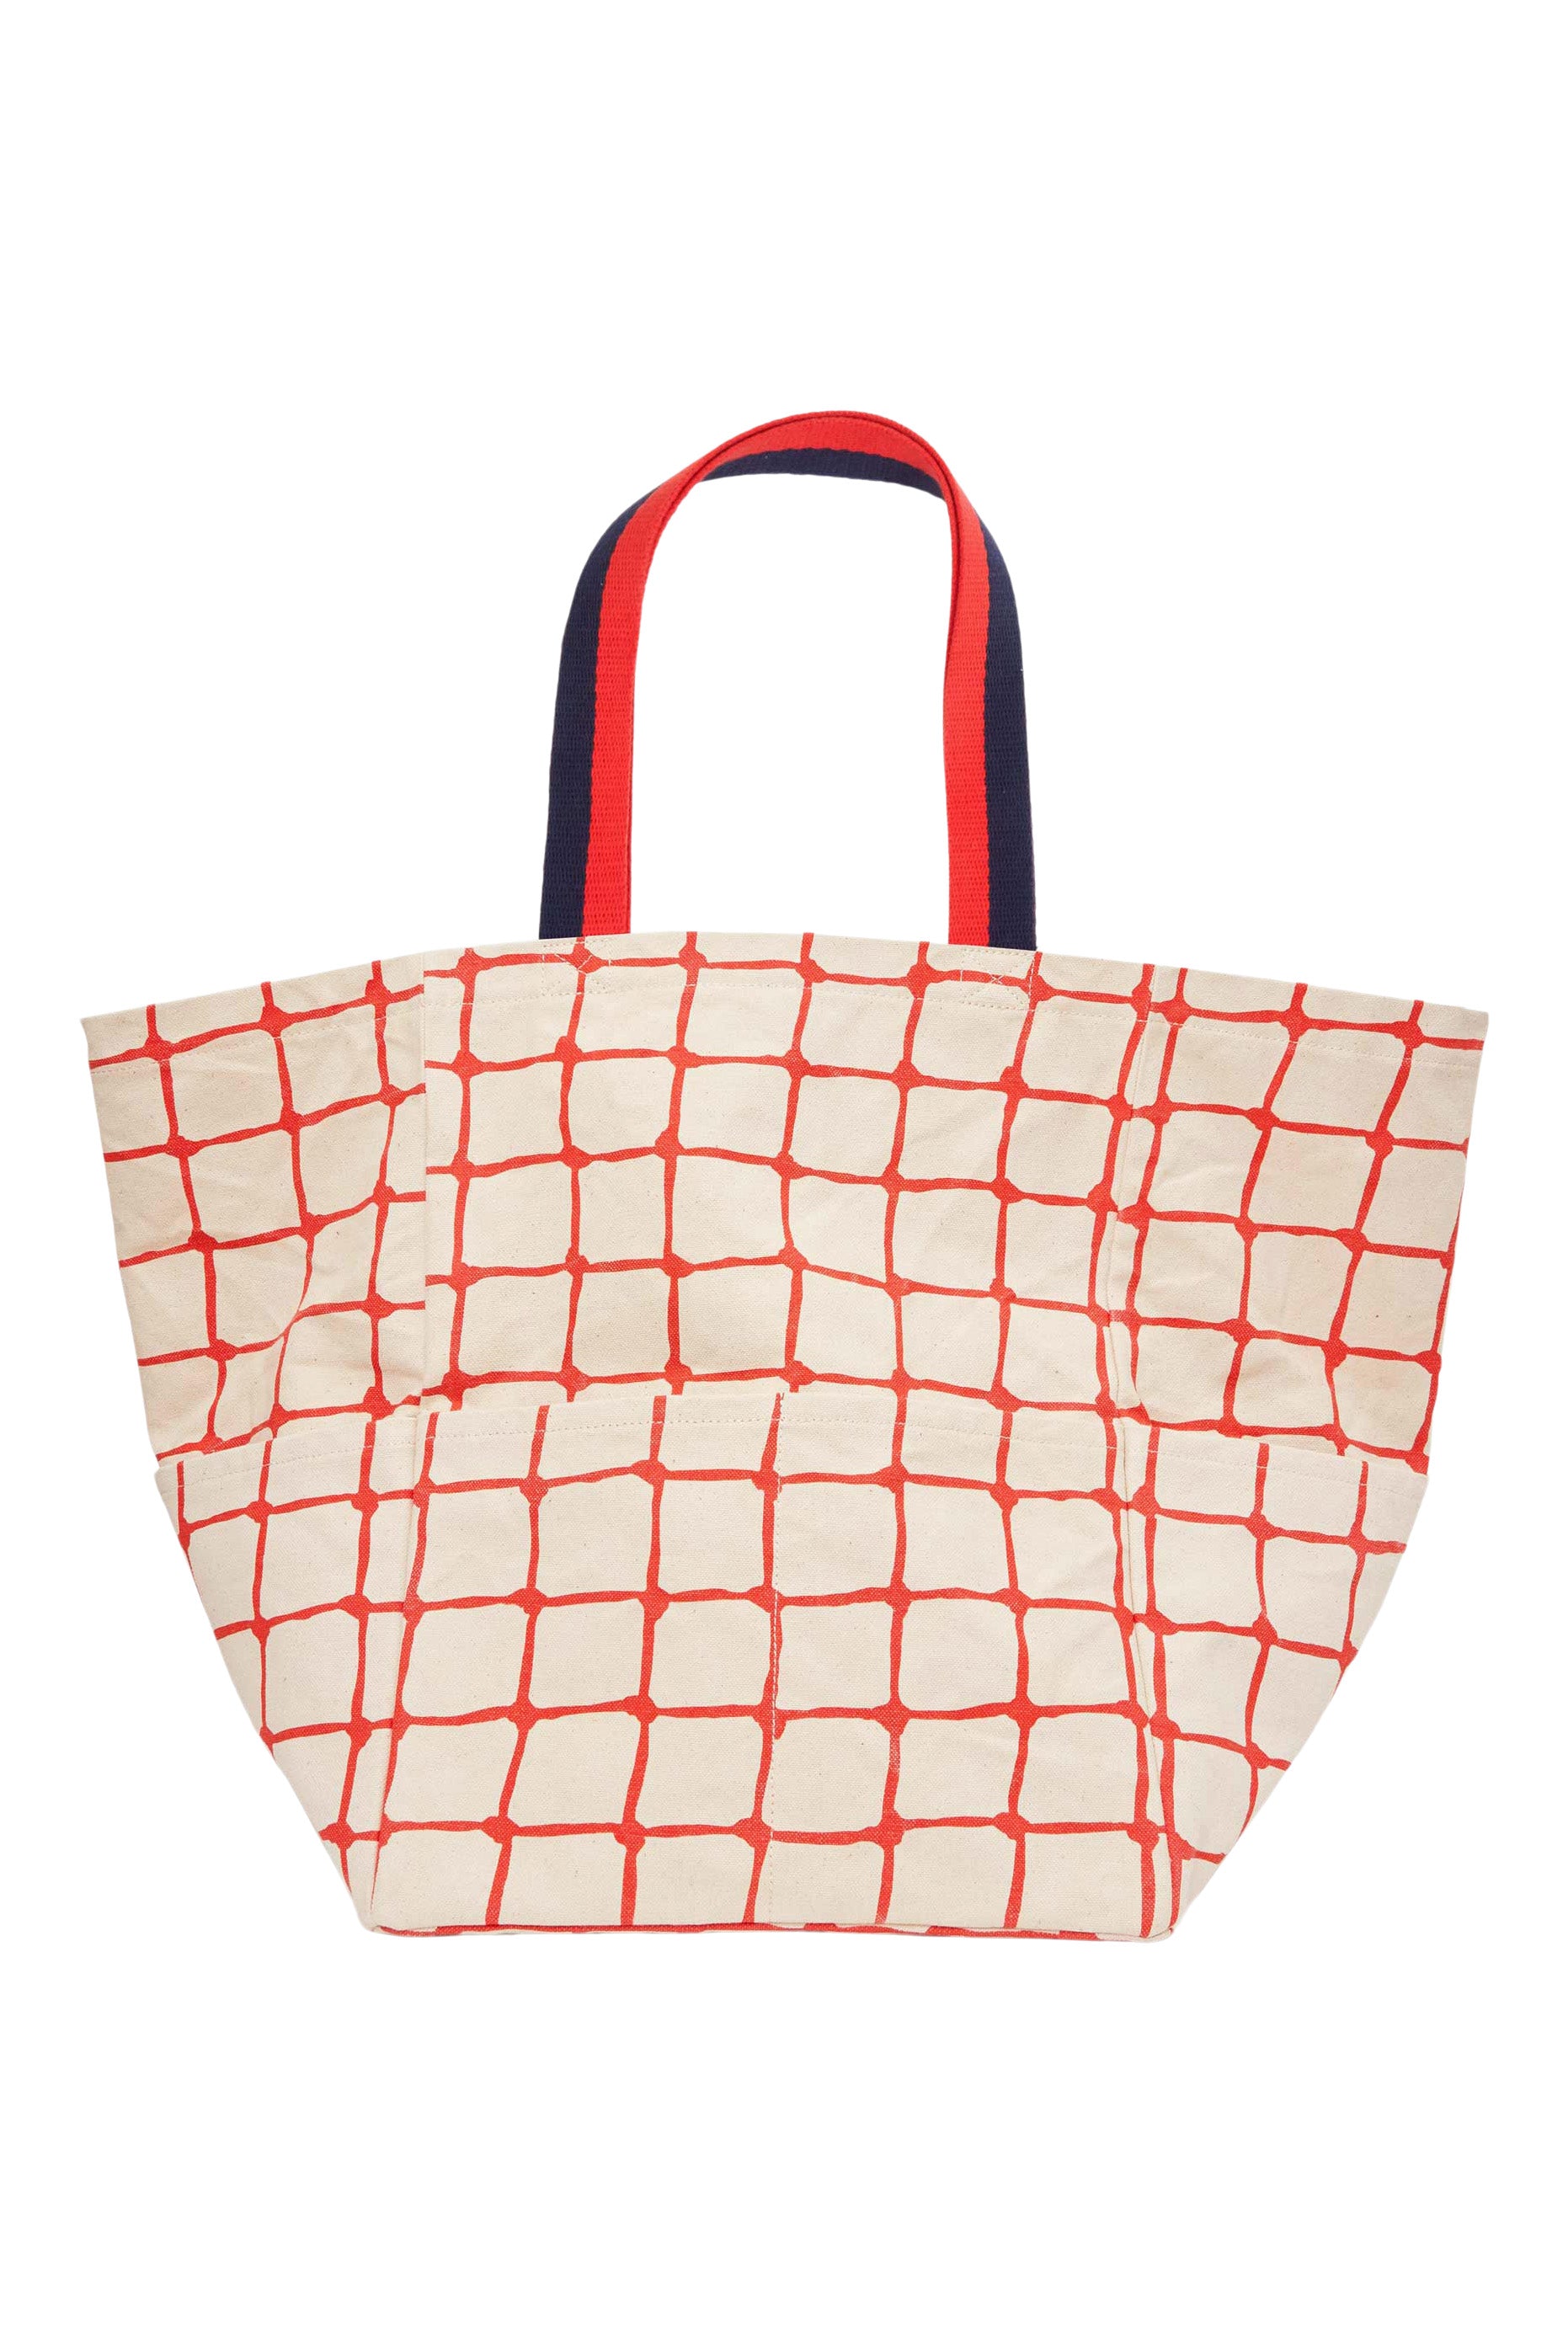 Clare V. Giant Marine Tote in Natural w/ Bright Poppy Net Printed Canvas